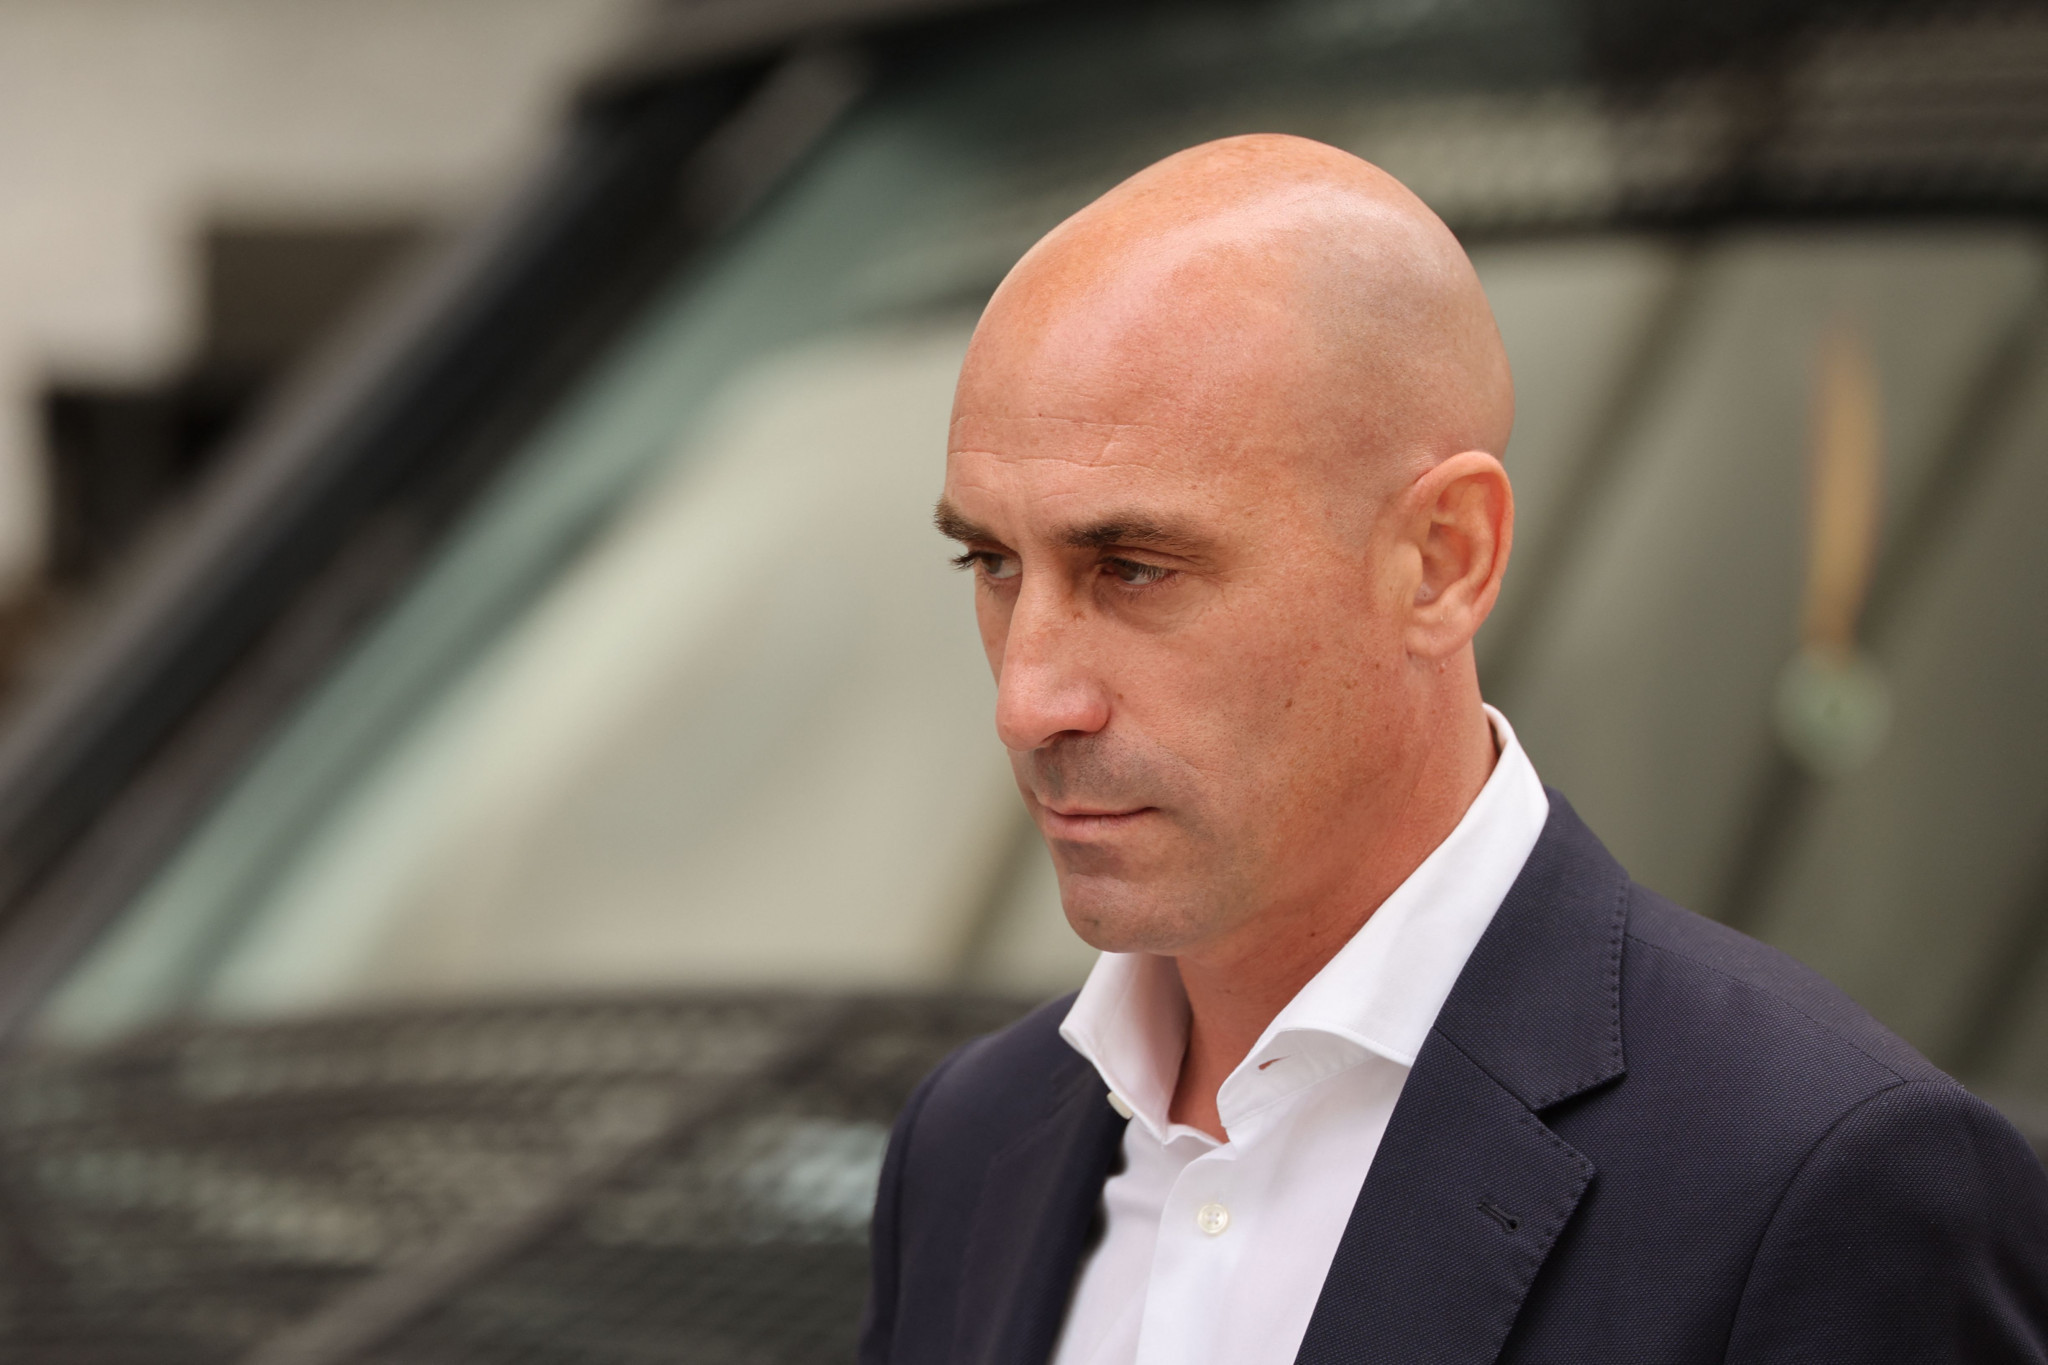 Former Spanish football President Rubiales banned for three years by FIFA over Hermoso kiss scandal